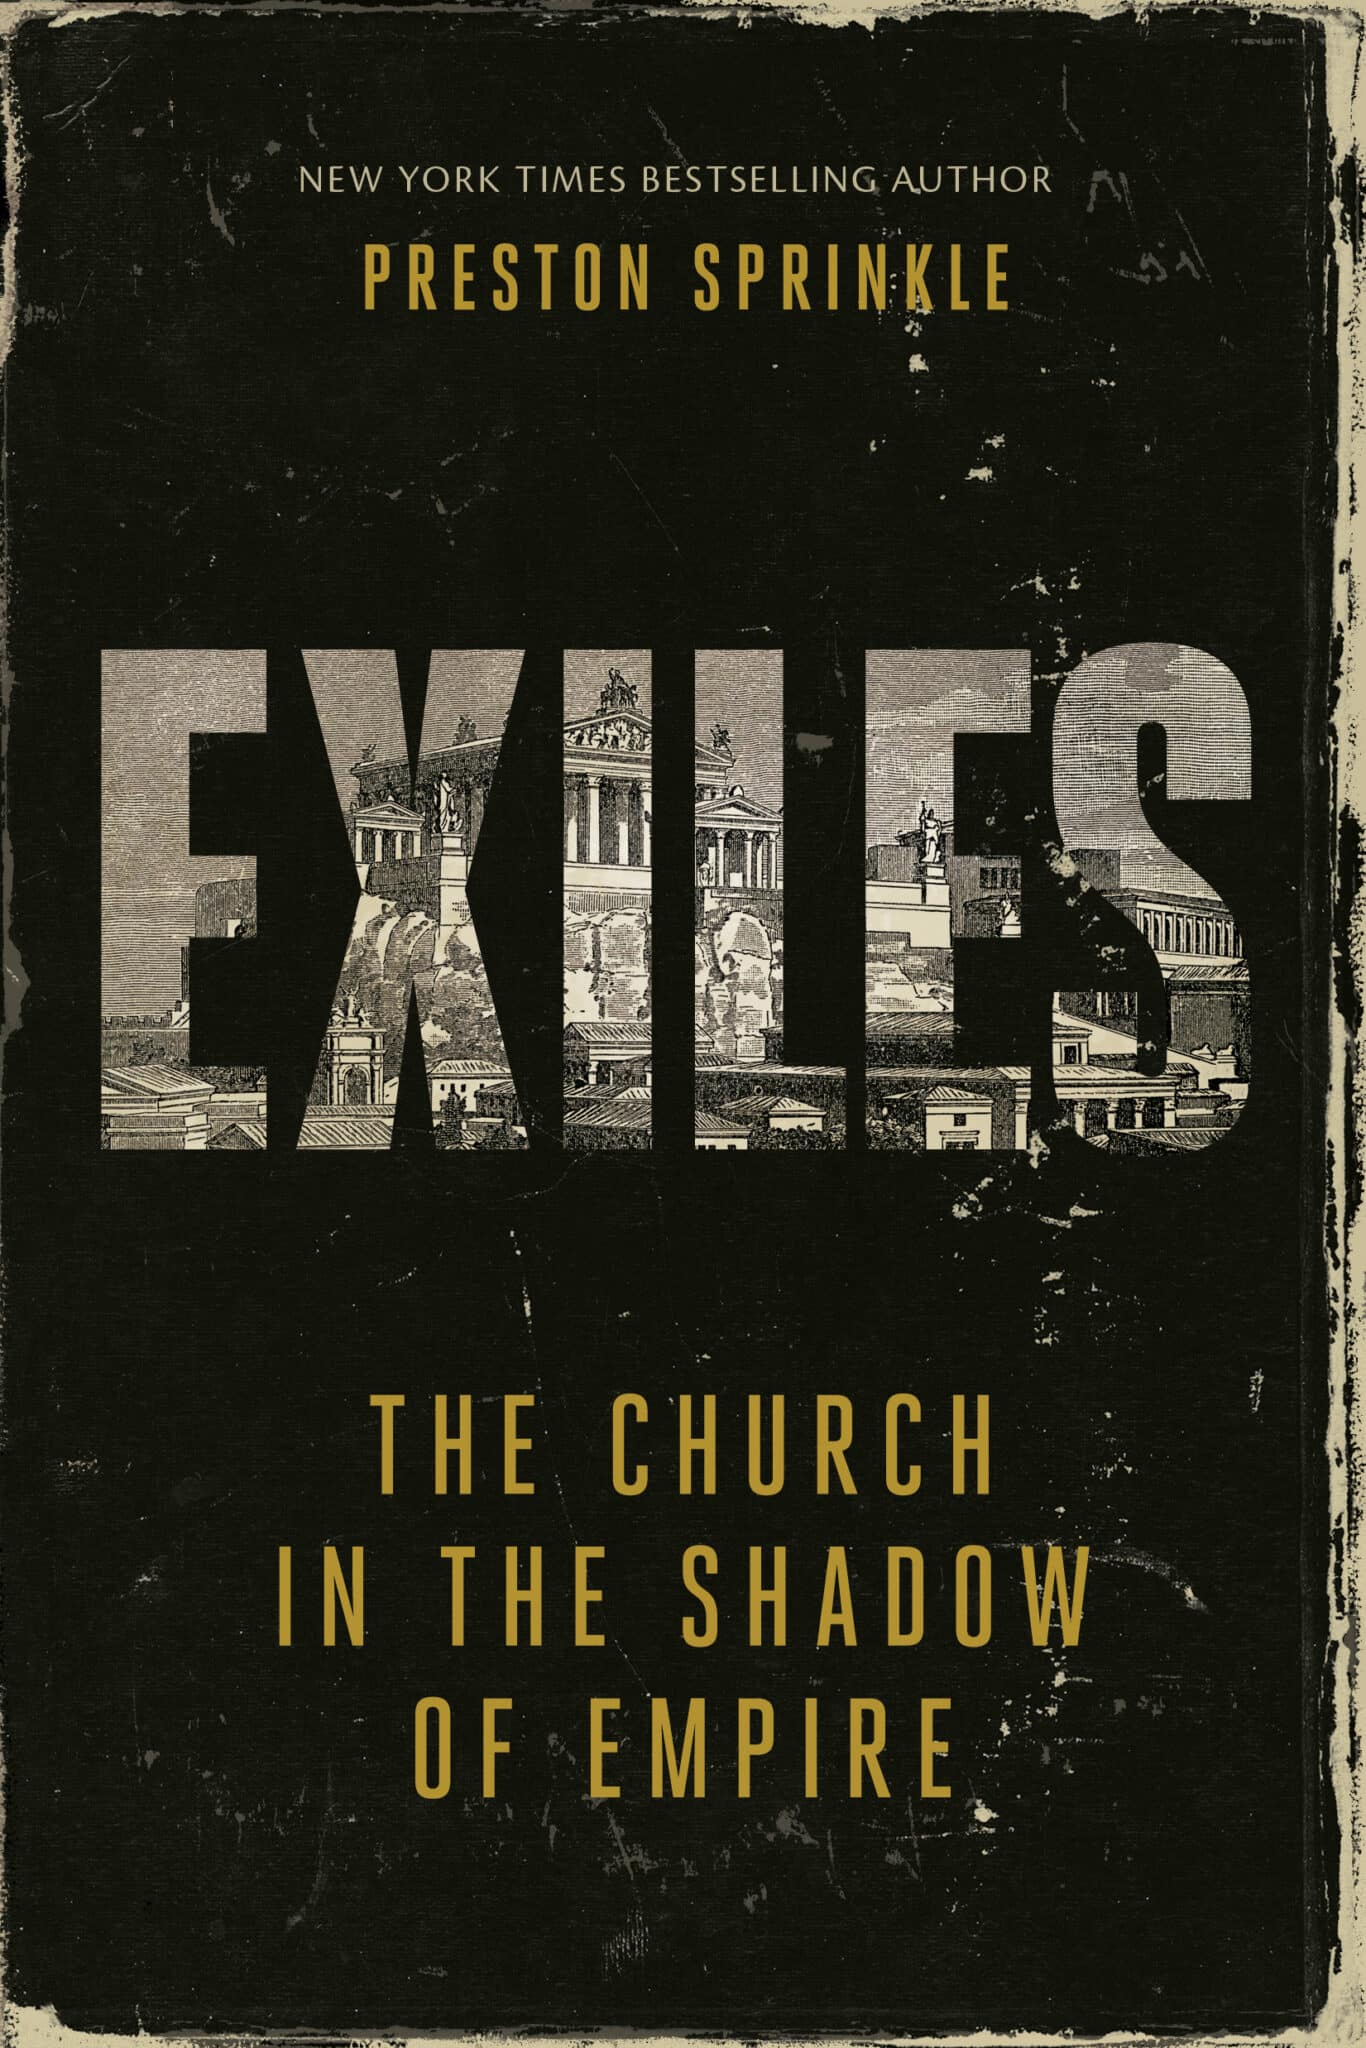 exiles book cover image